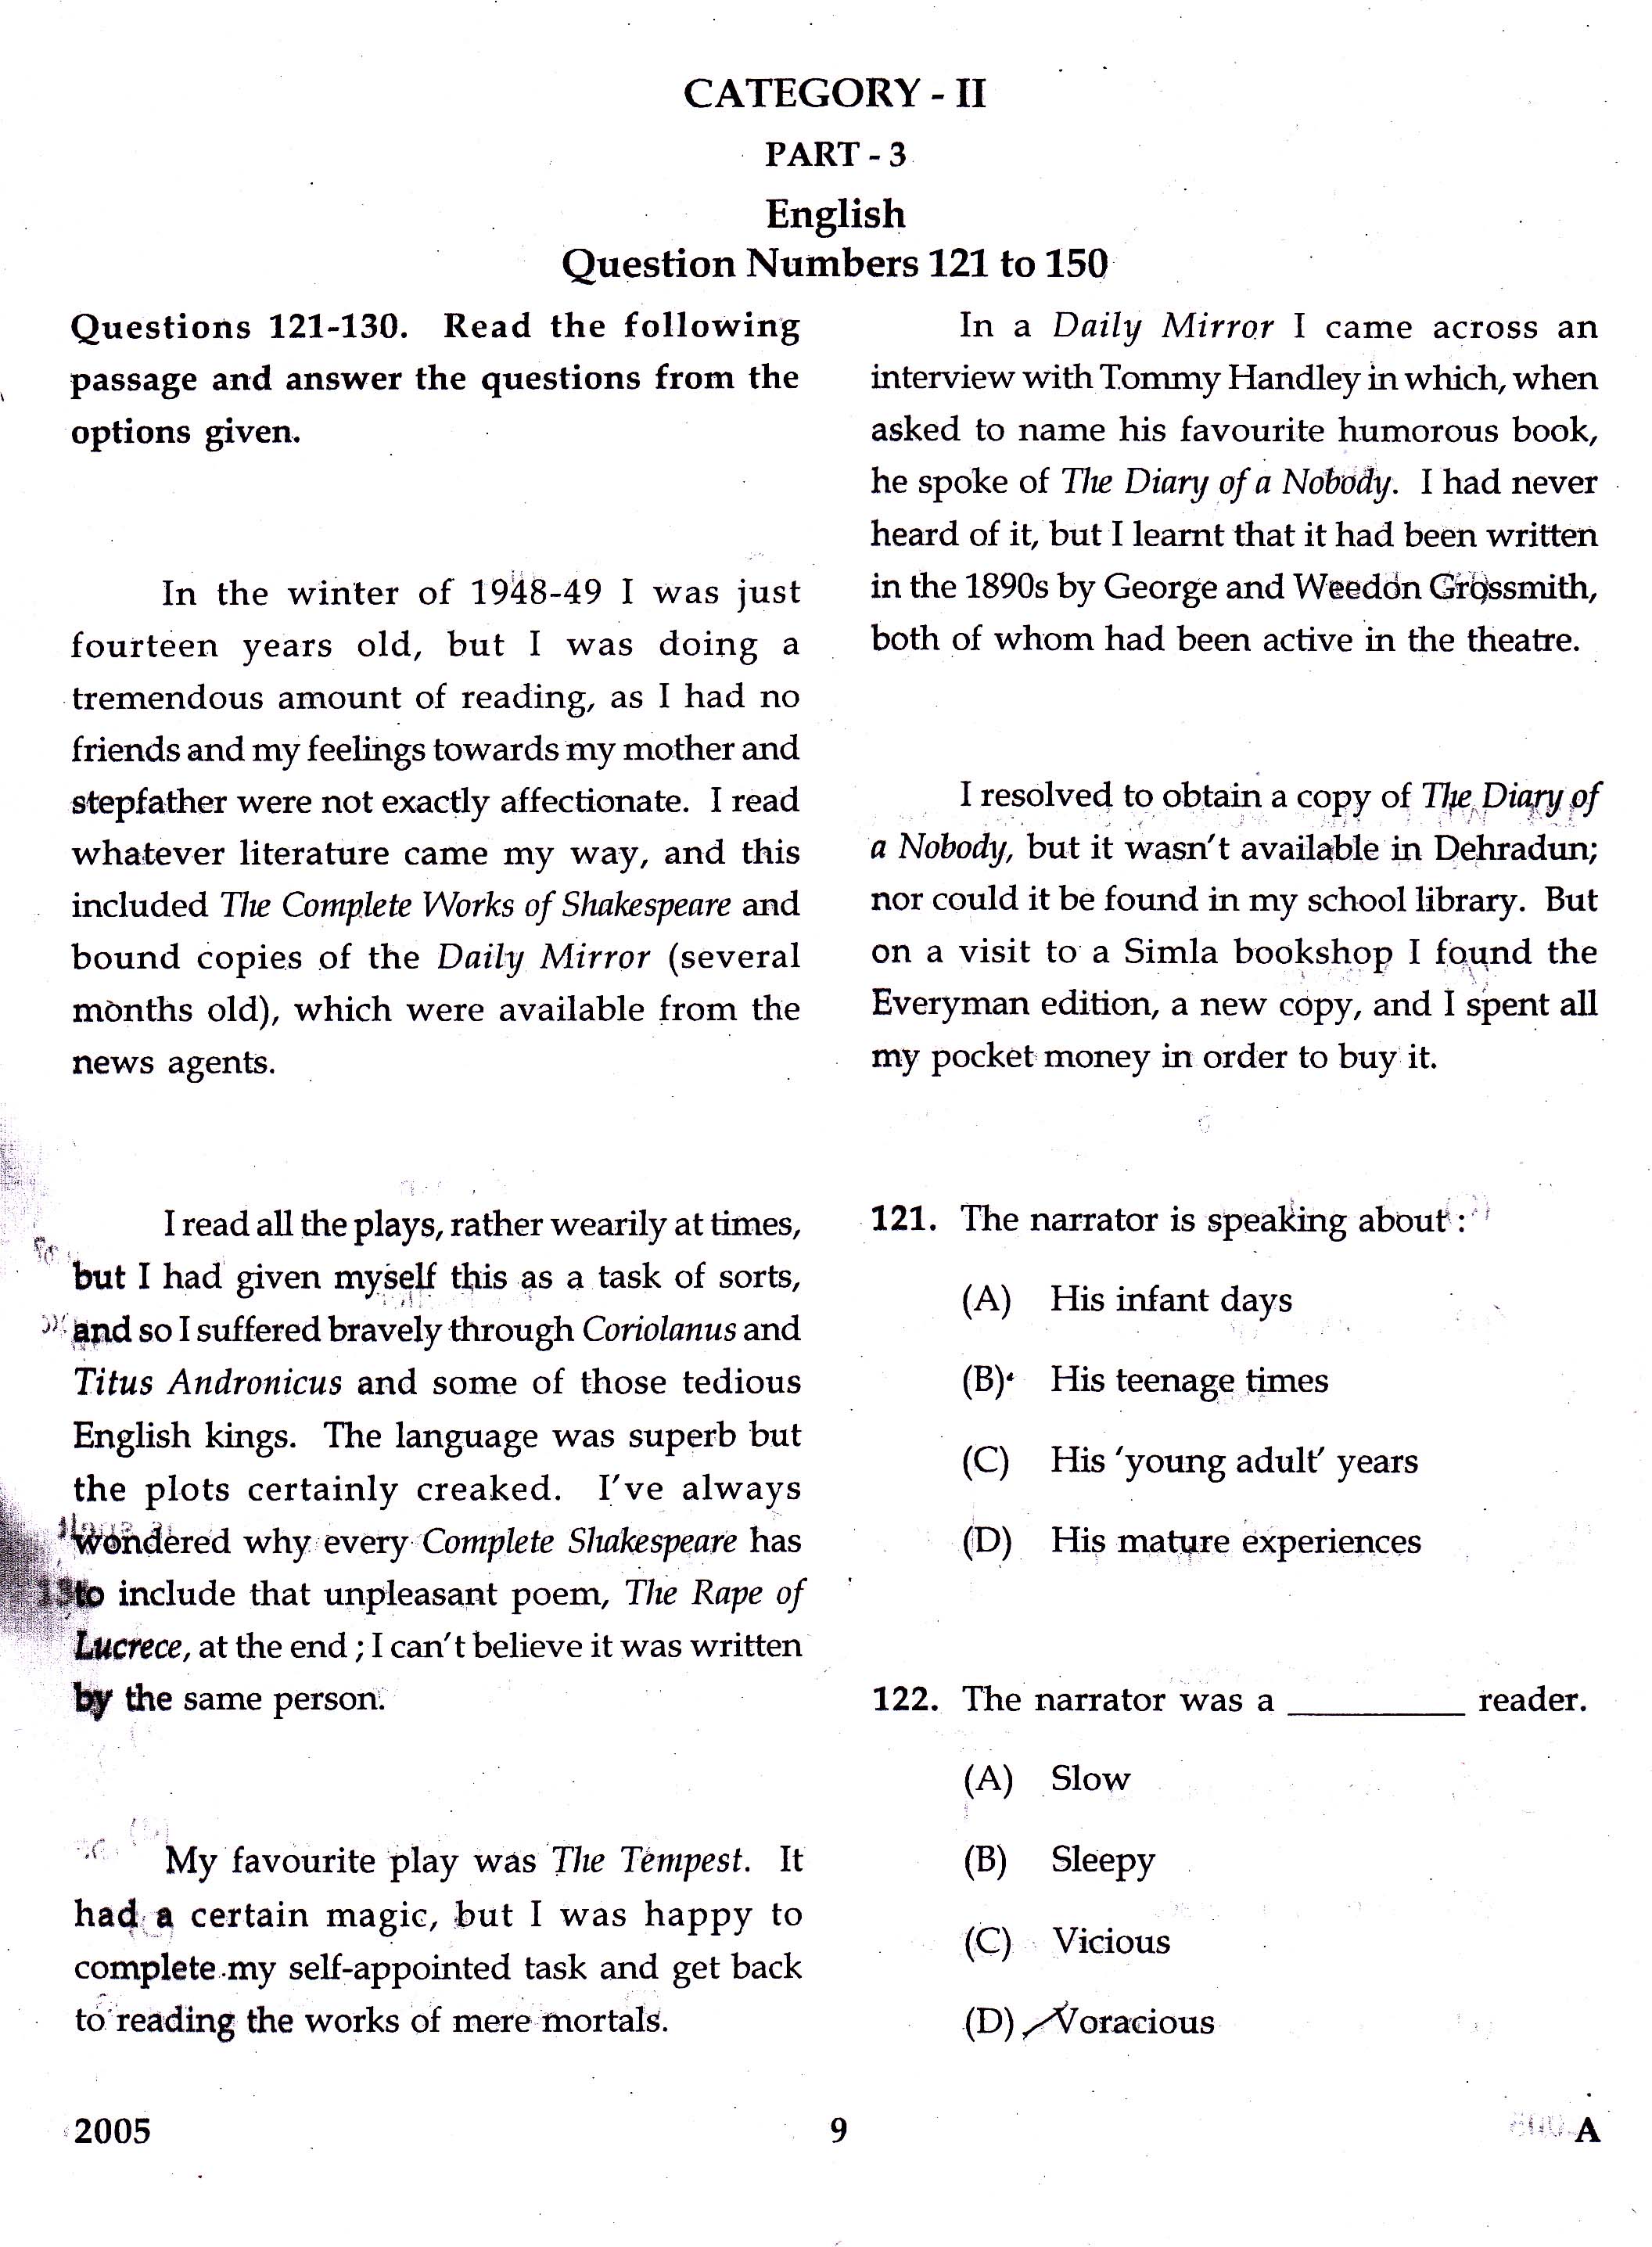 KTET Category II Part 3 English Question Paper with Answers December 2017 1